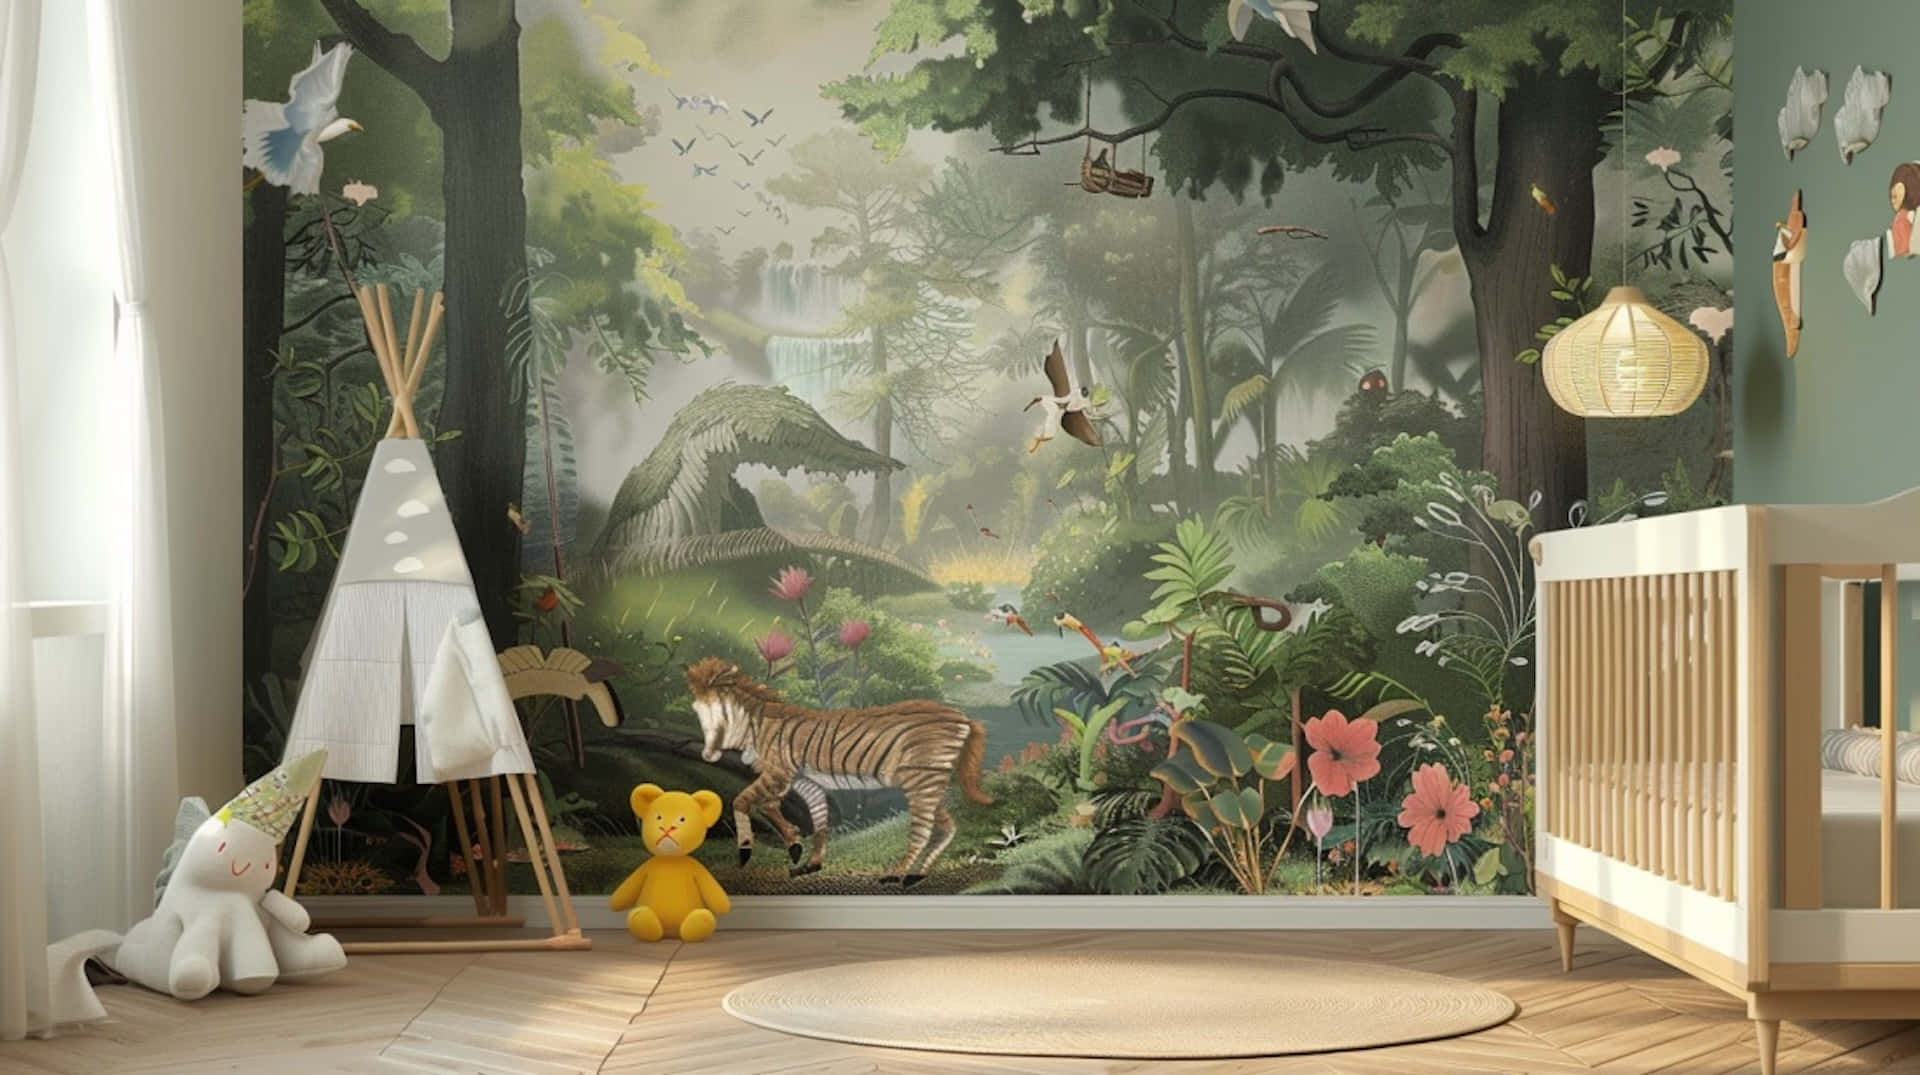 Enchanted Forest Nursery Theme Wallpaper